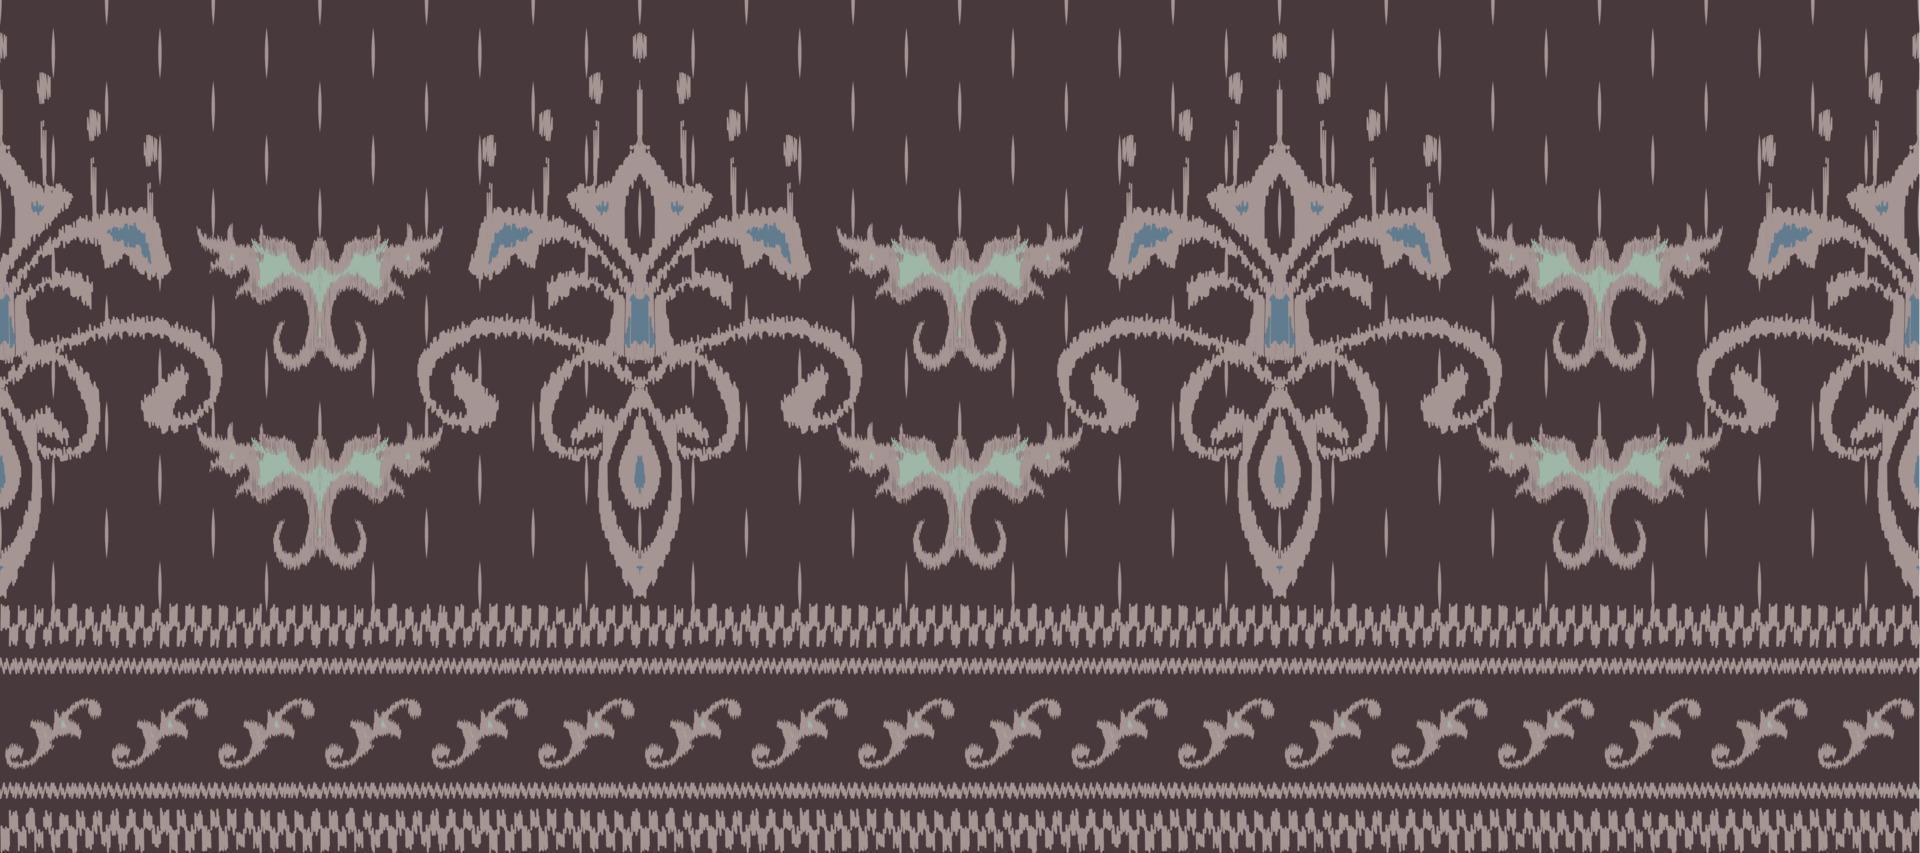 African Motif Ikat  paisley embroidery background. geometric ethnic oriental pattern traditional. Ikat Aztec style abstract vector illustration. design for print texture,fabric,saree,sari,carpet.